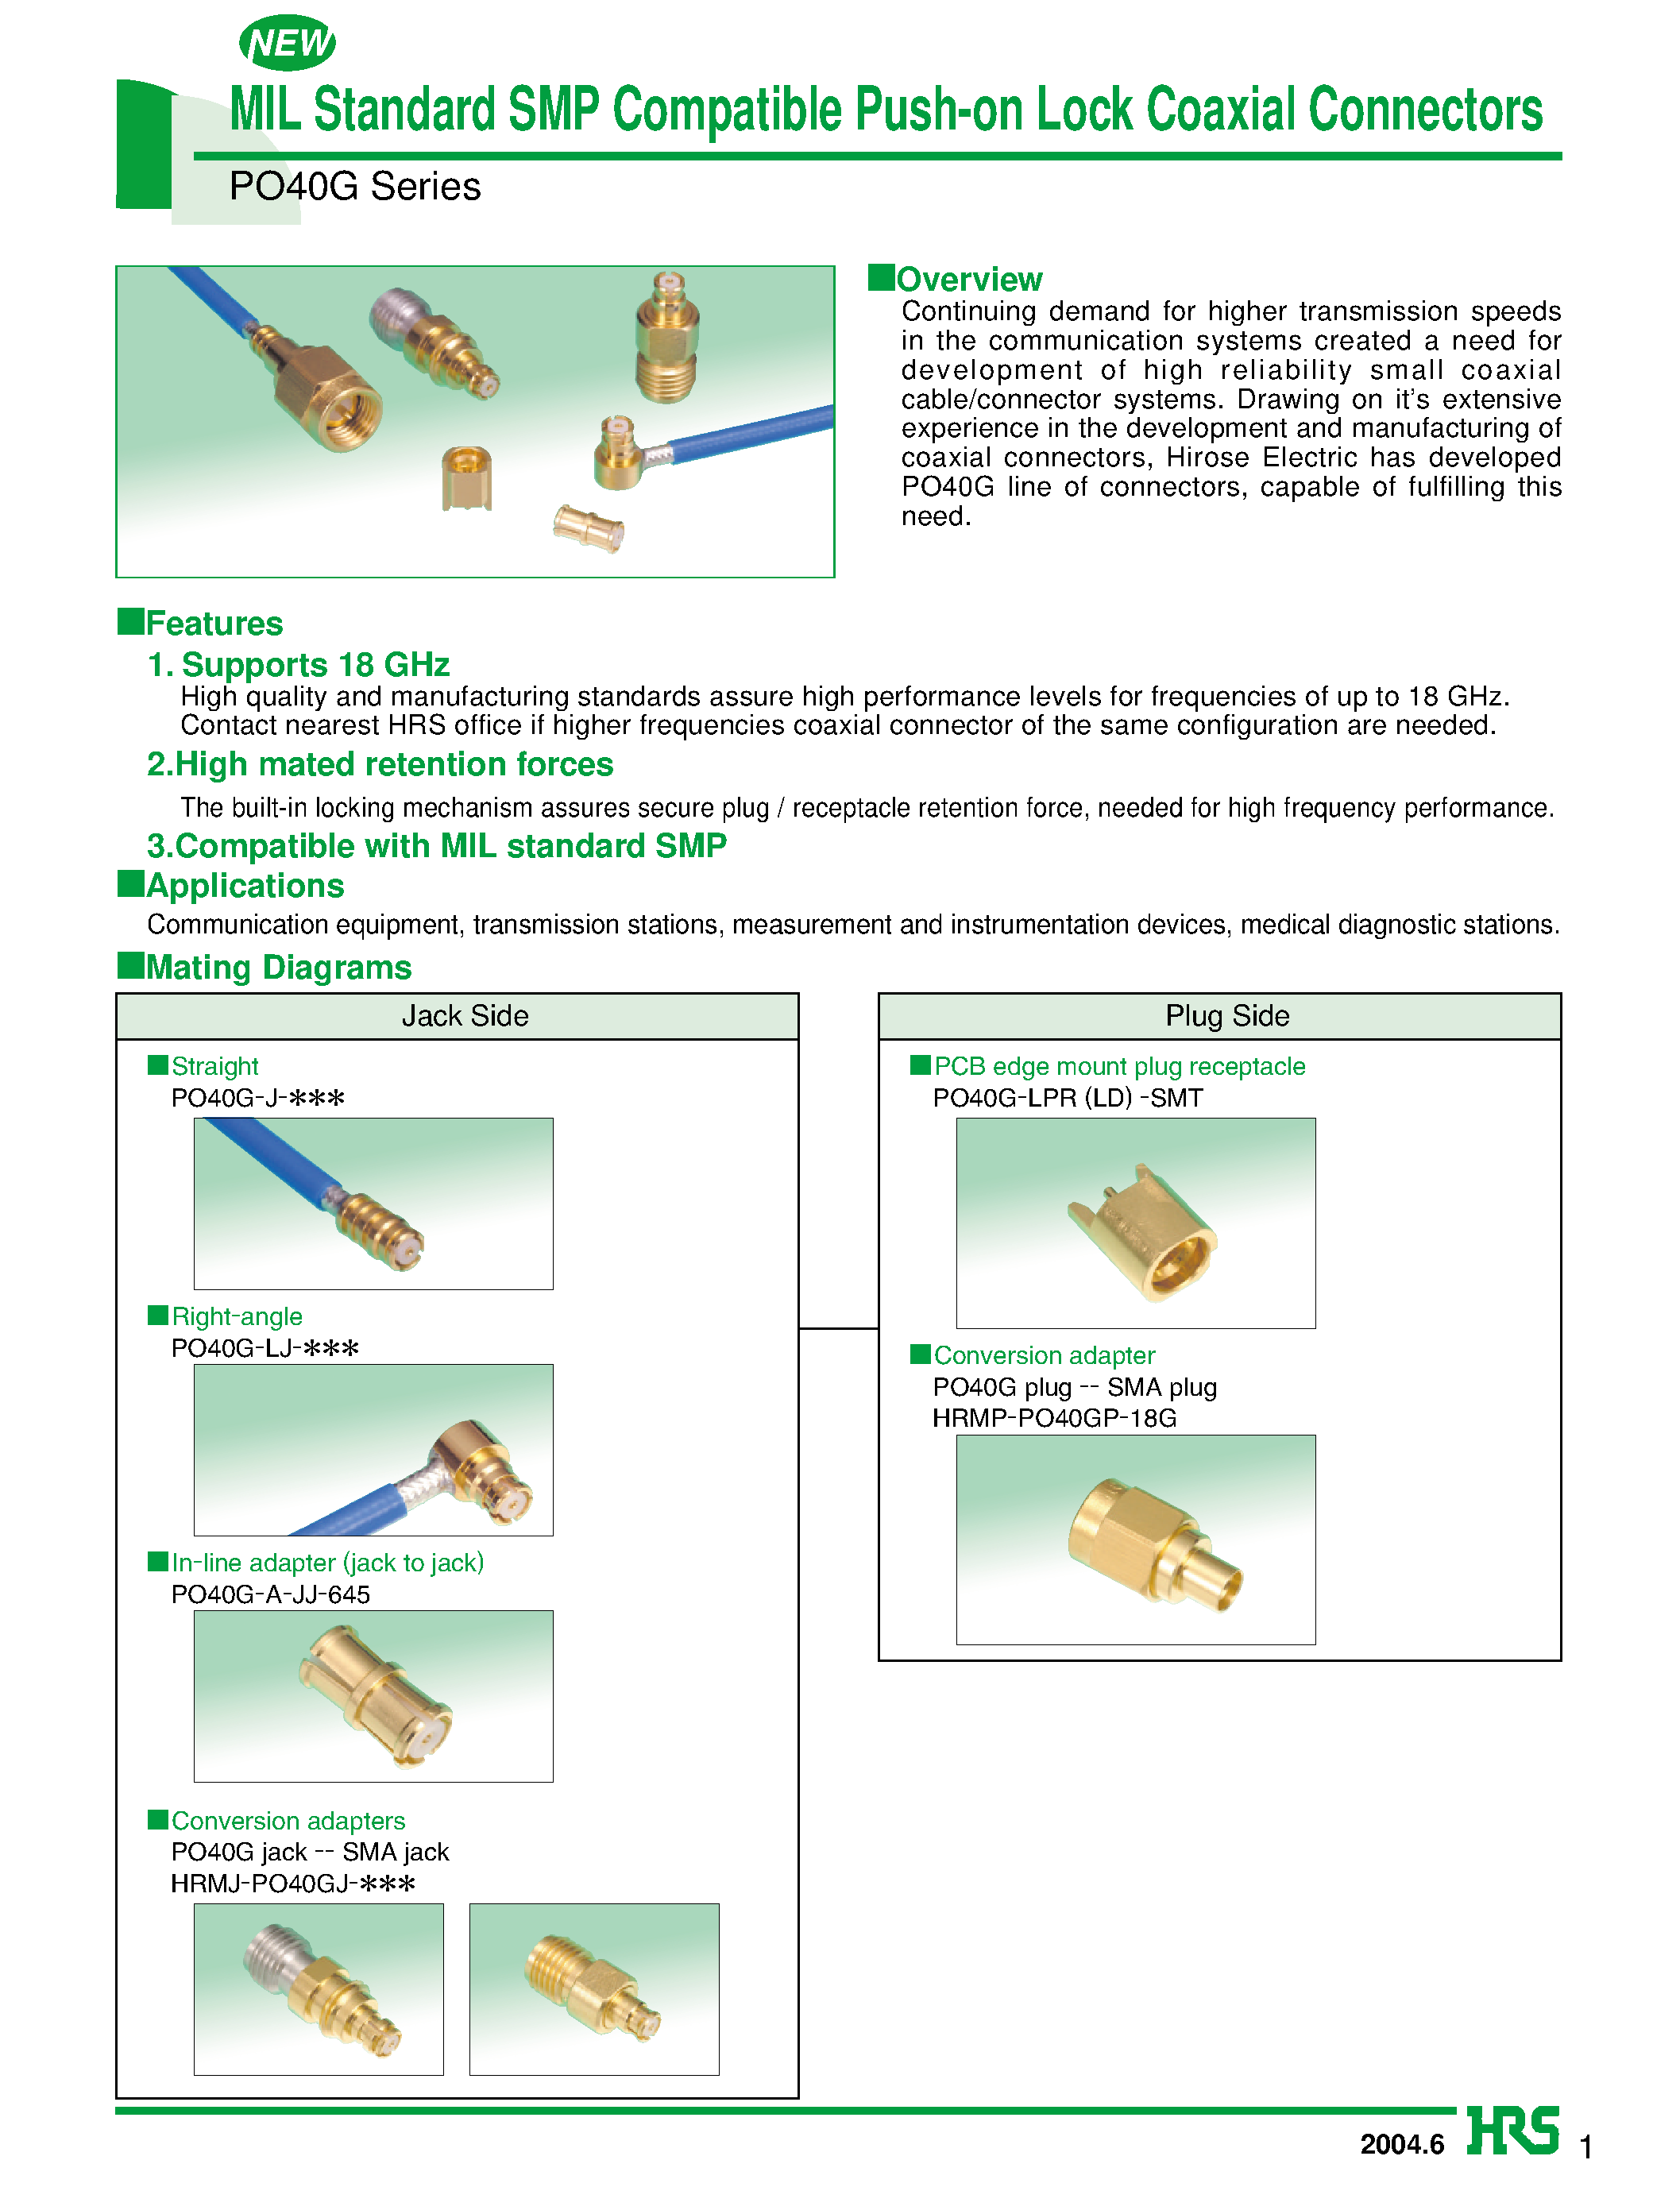 Datasheet PO40G-J-SMT - MIL Standard SMP Compatible Push-on Lock Coaxial Connectors page 1